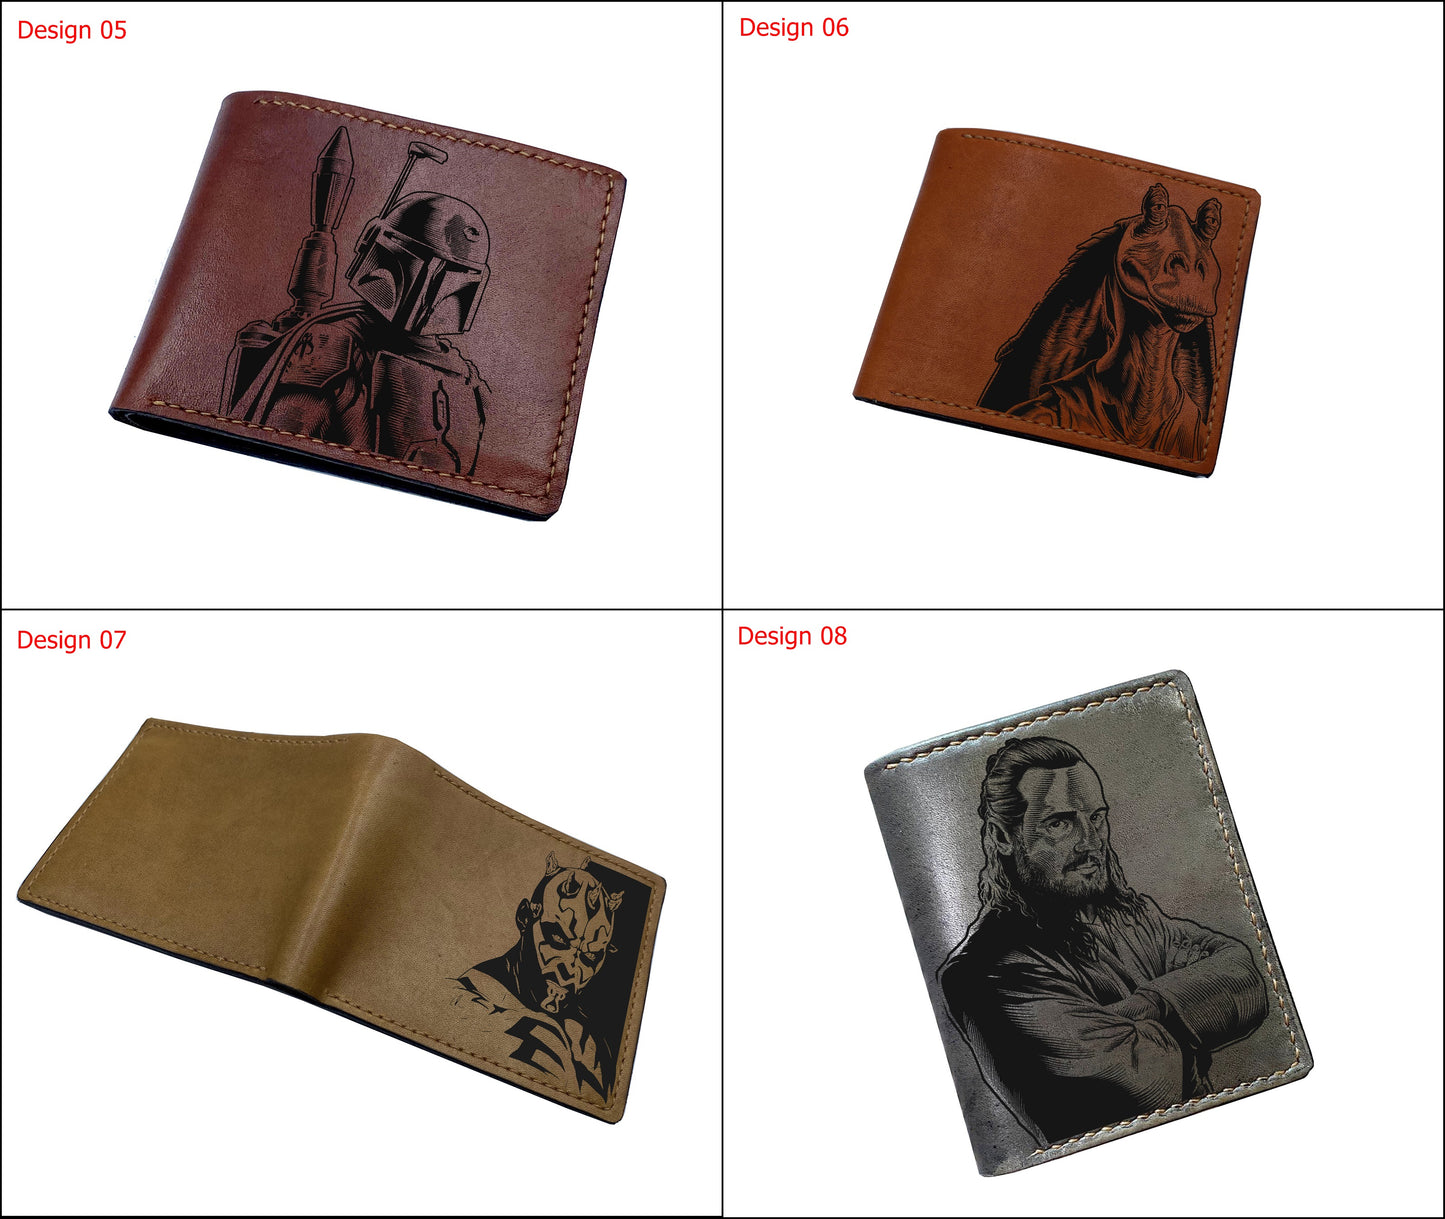 Starwars leather handmade men's wallet, leather gift ideas for men, christmas present for dad, starwars fan art gifts